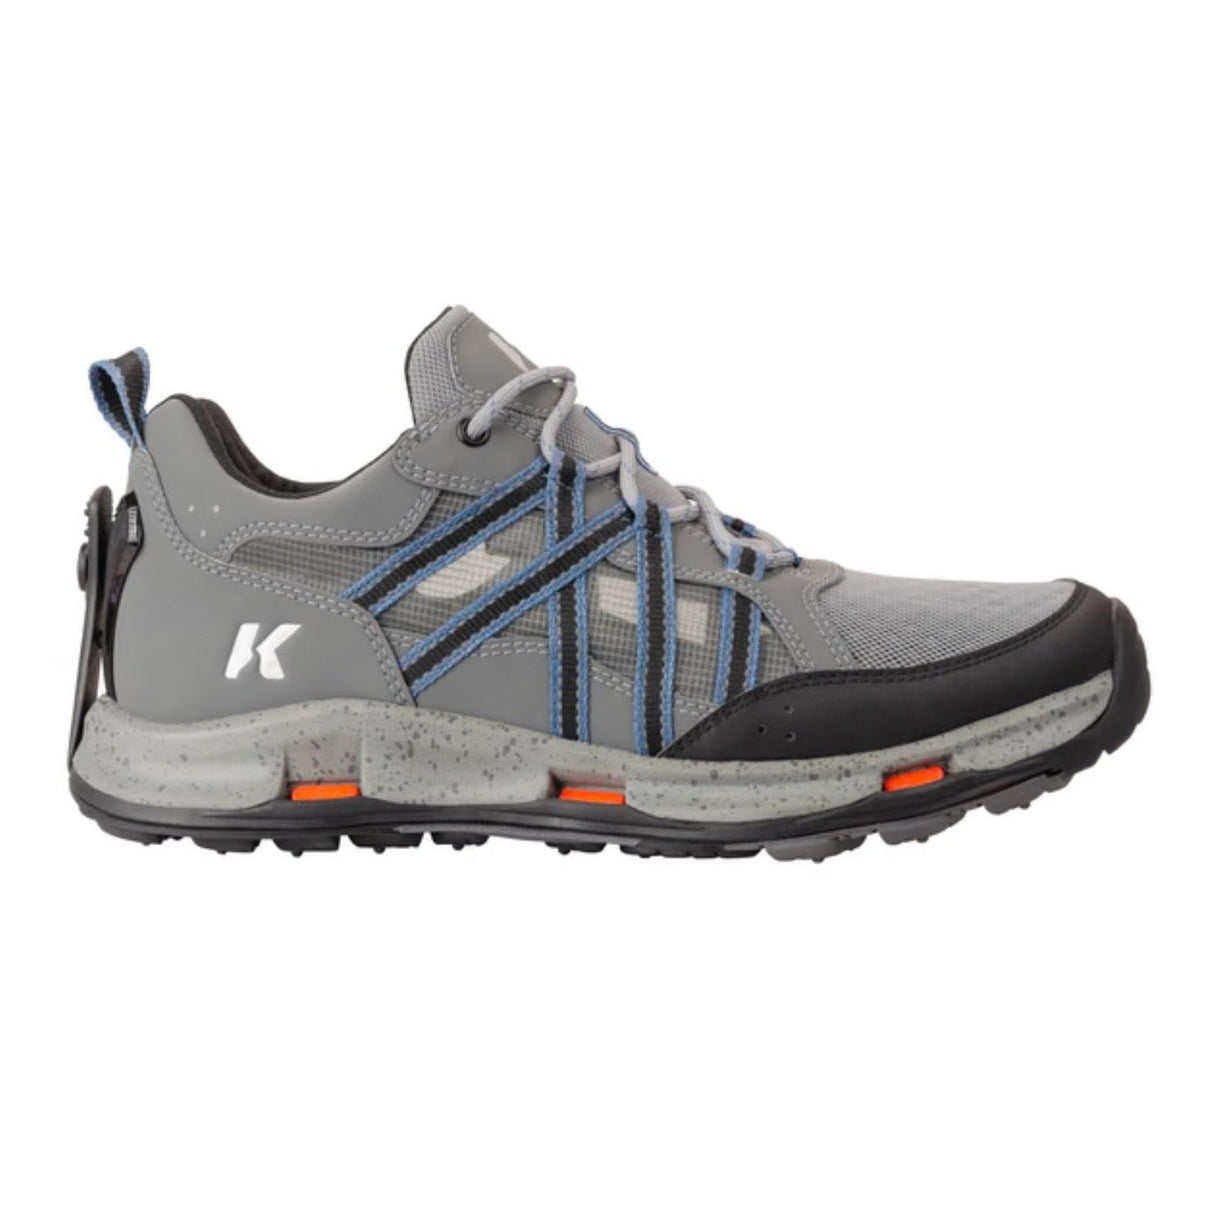 Korkers All Axis Shoe (with Vibram XS Trek Sole)